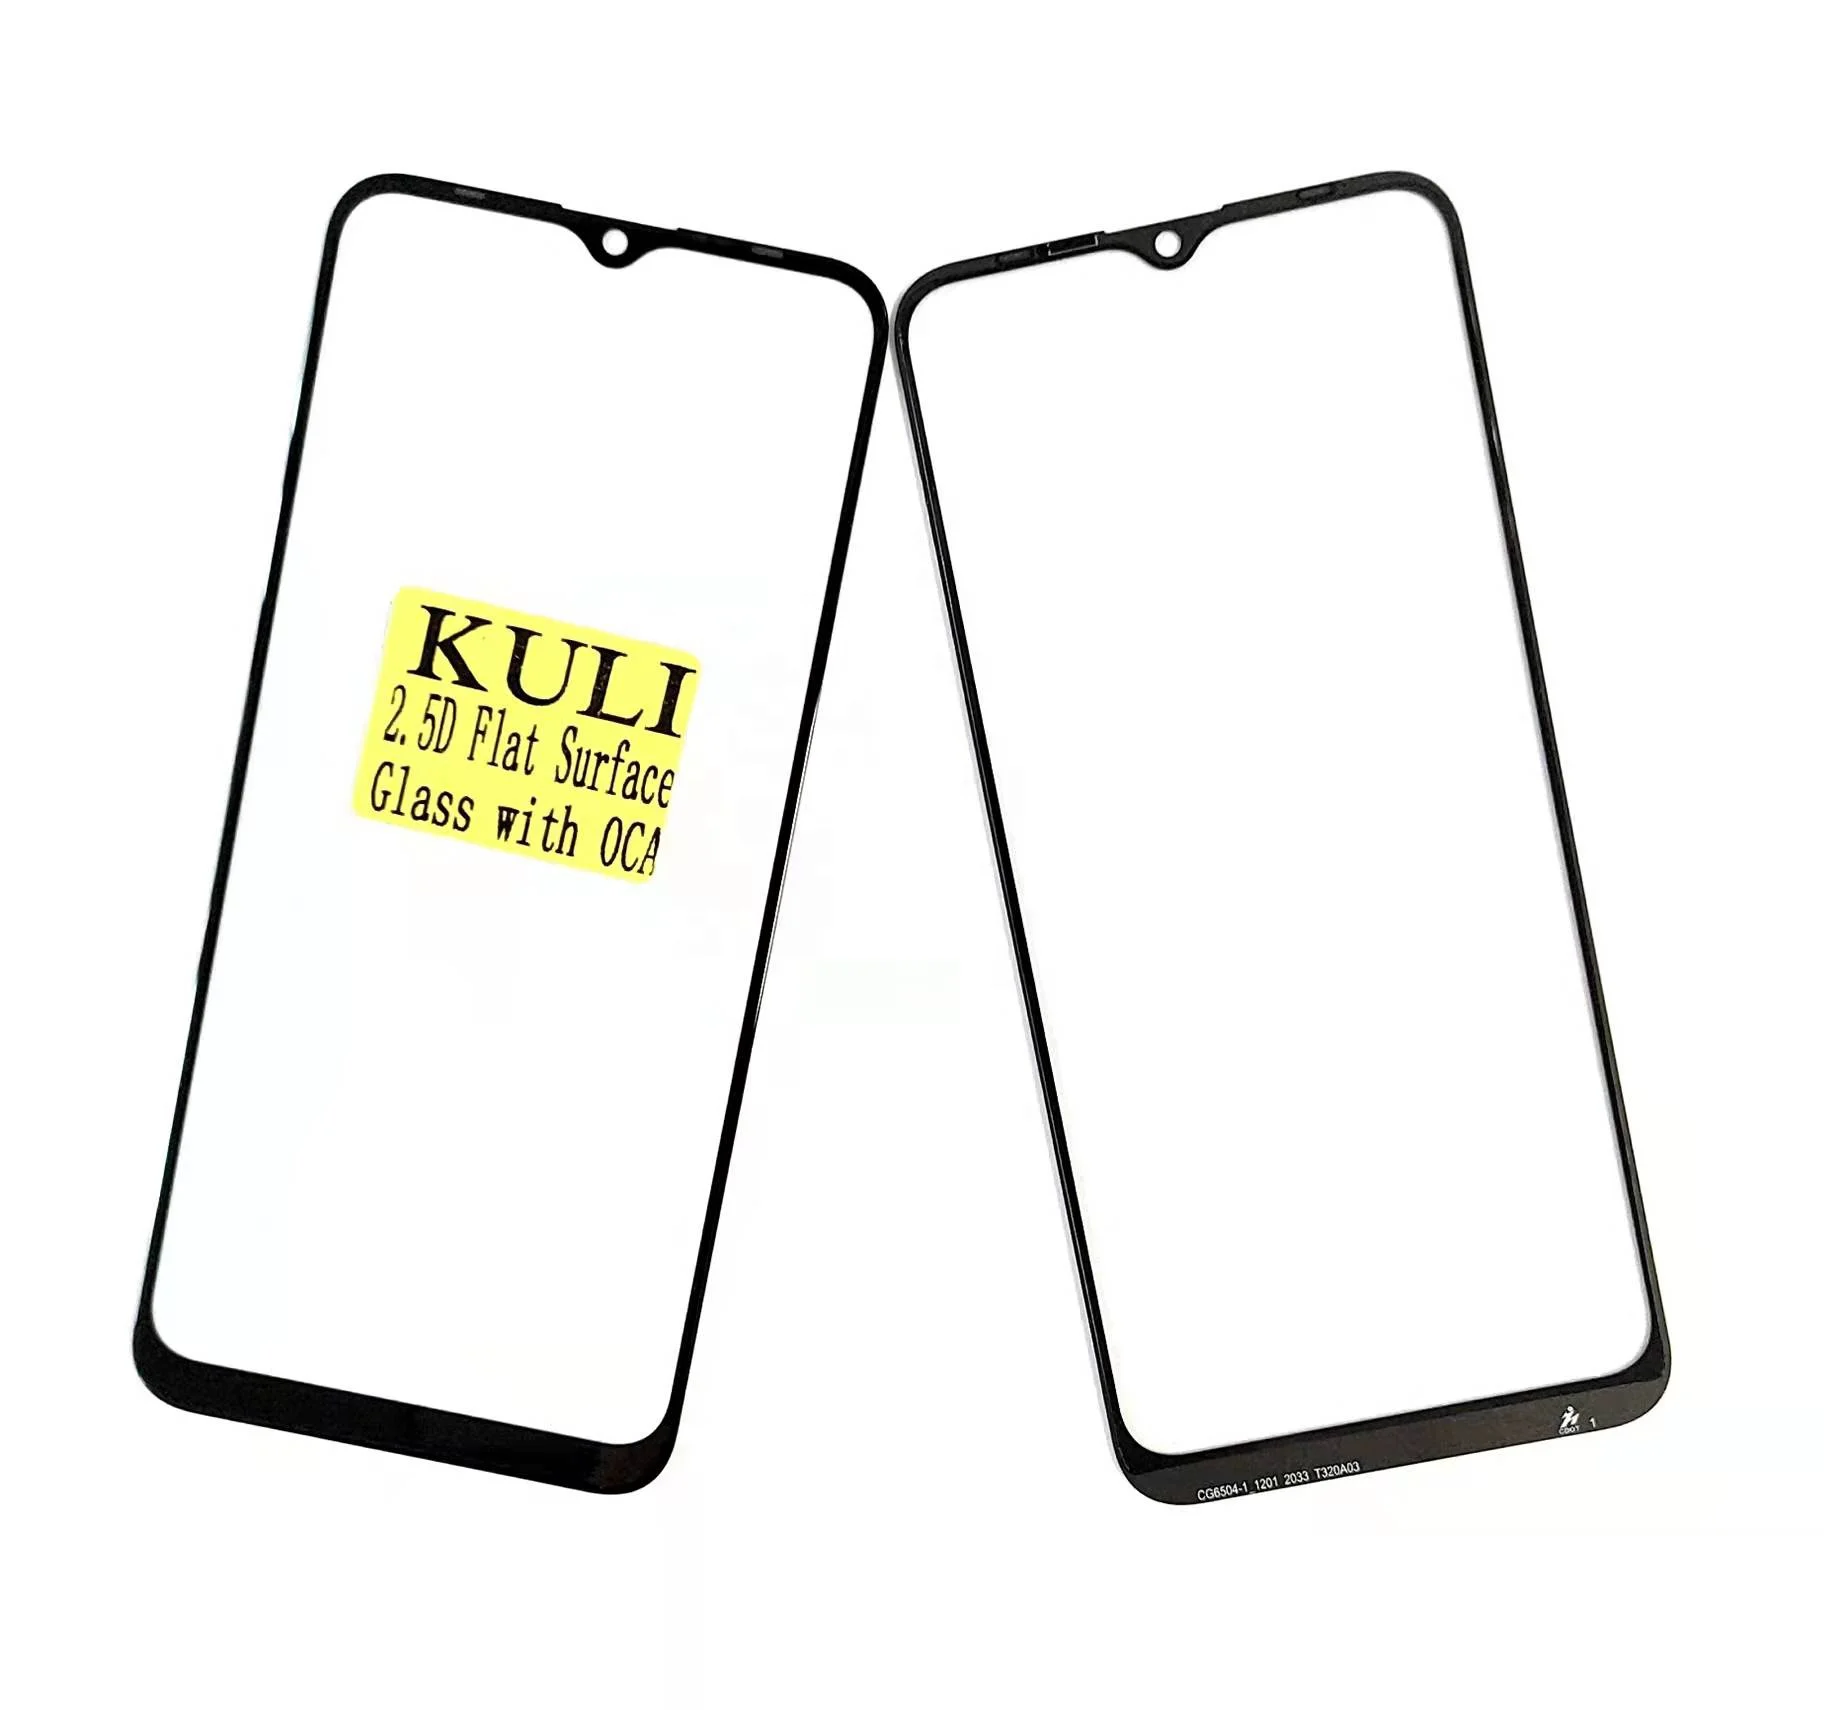 

KULI limited time discount for infinx x650 wholesale front glass with OCA Touch Screen Digitizer mobile display replacement